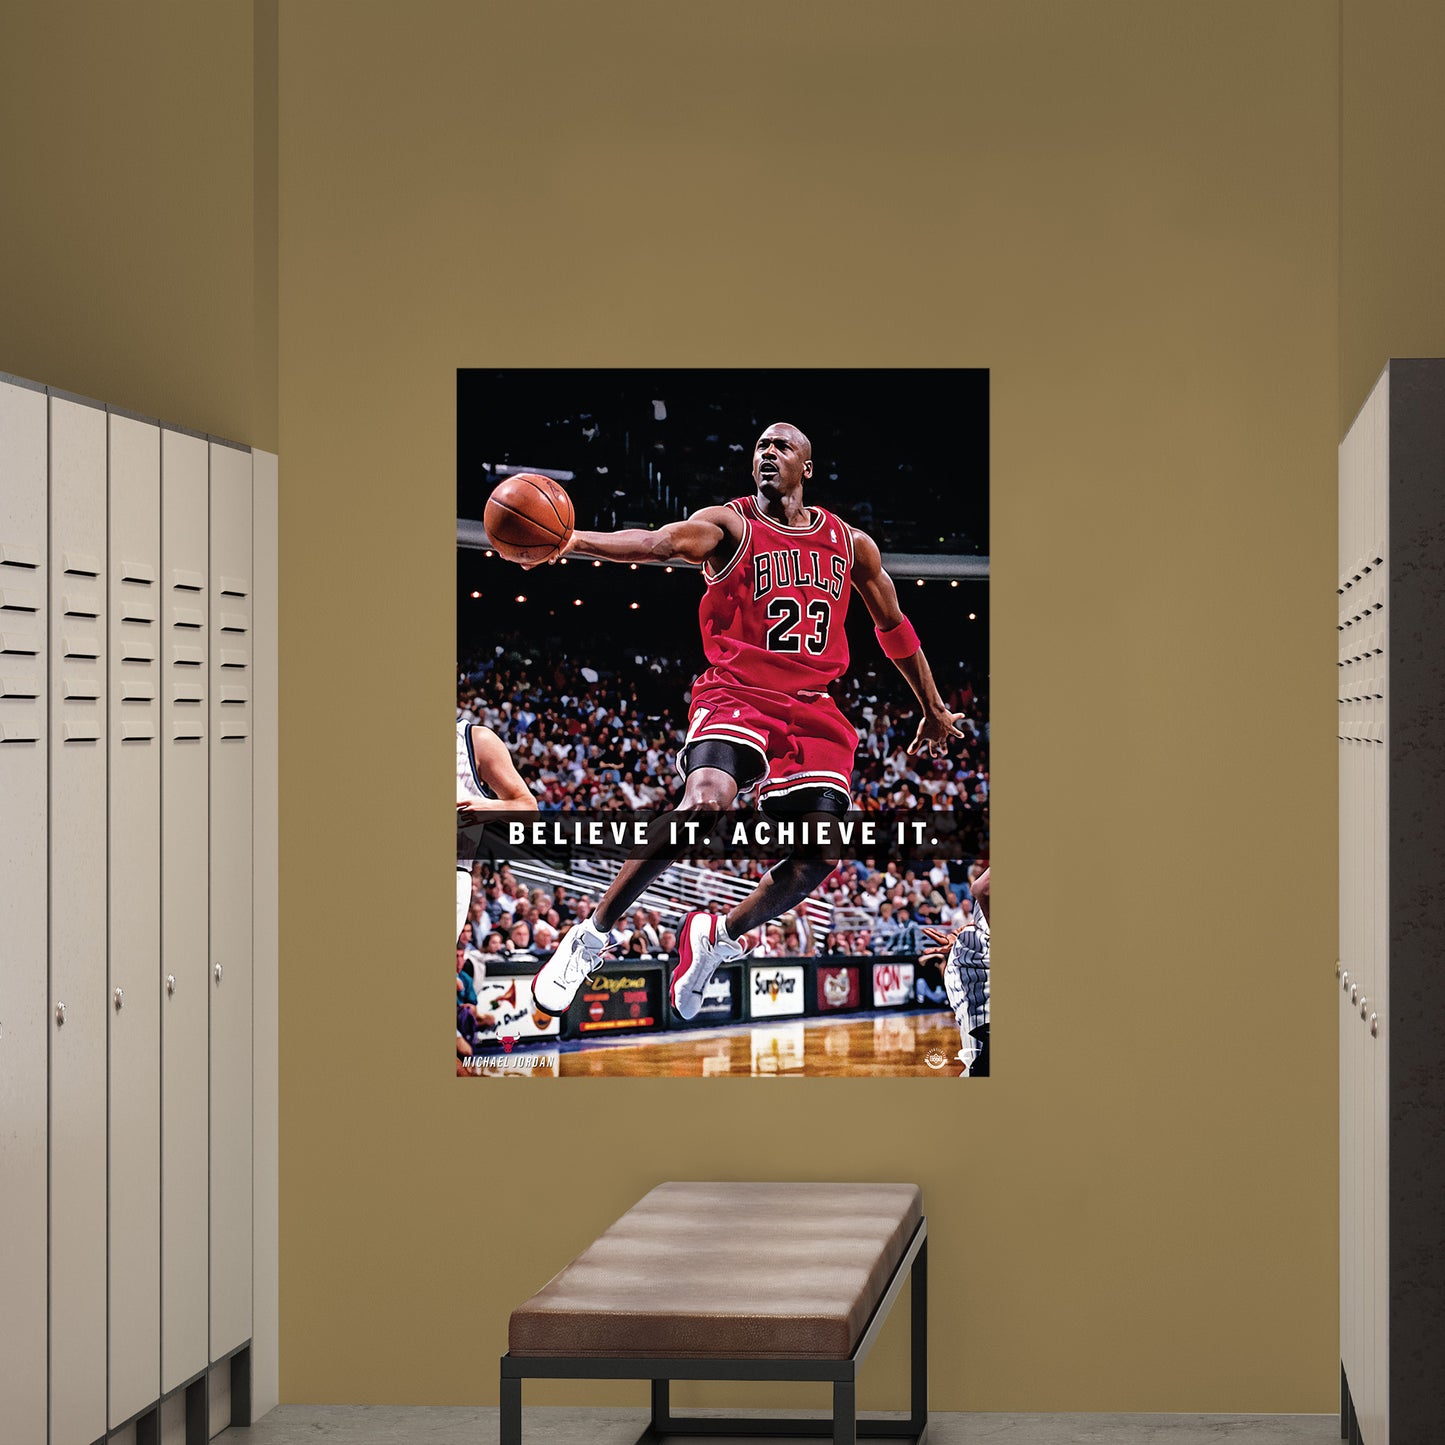 Chicago Bulls: Michael Jordan Scoring Motivational Poster - Officially Licensed NBA Removable Adhesive Decal